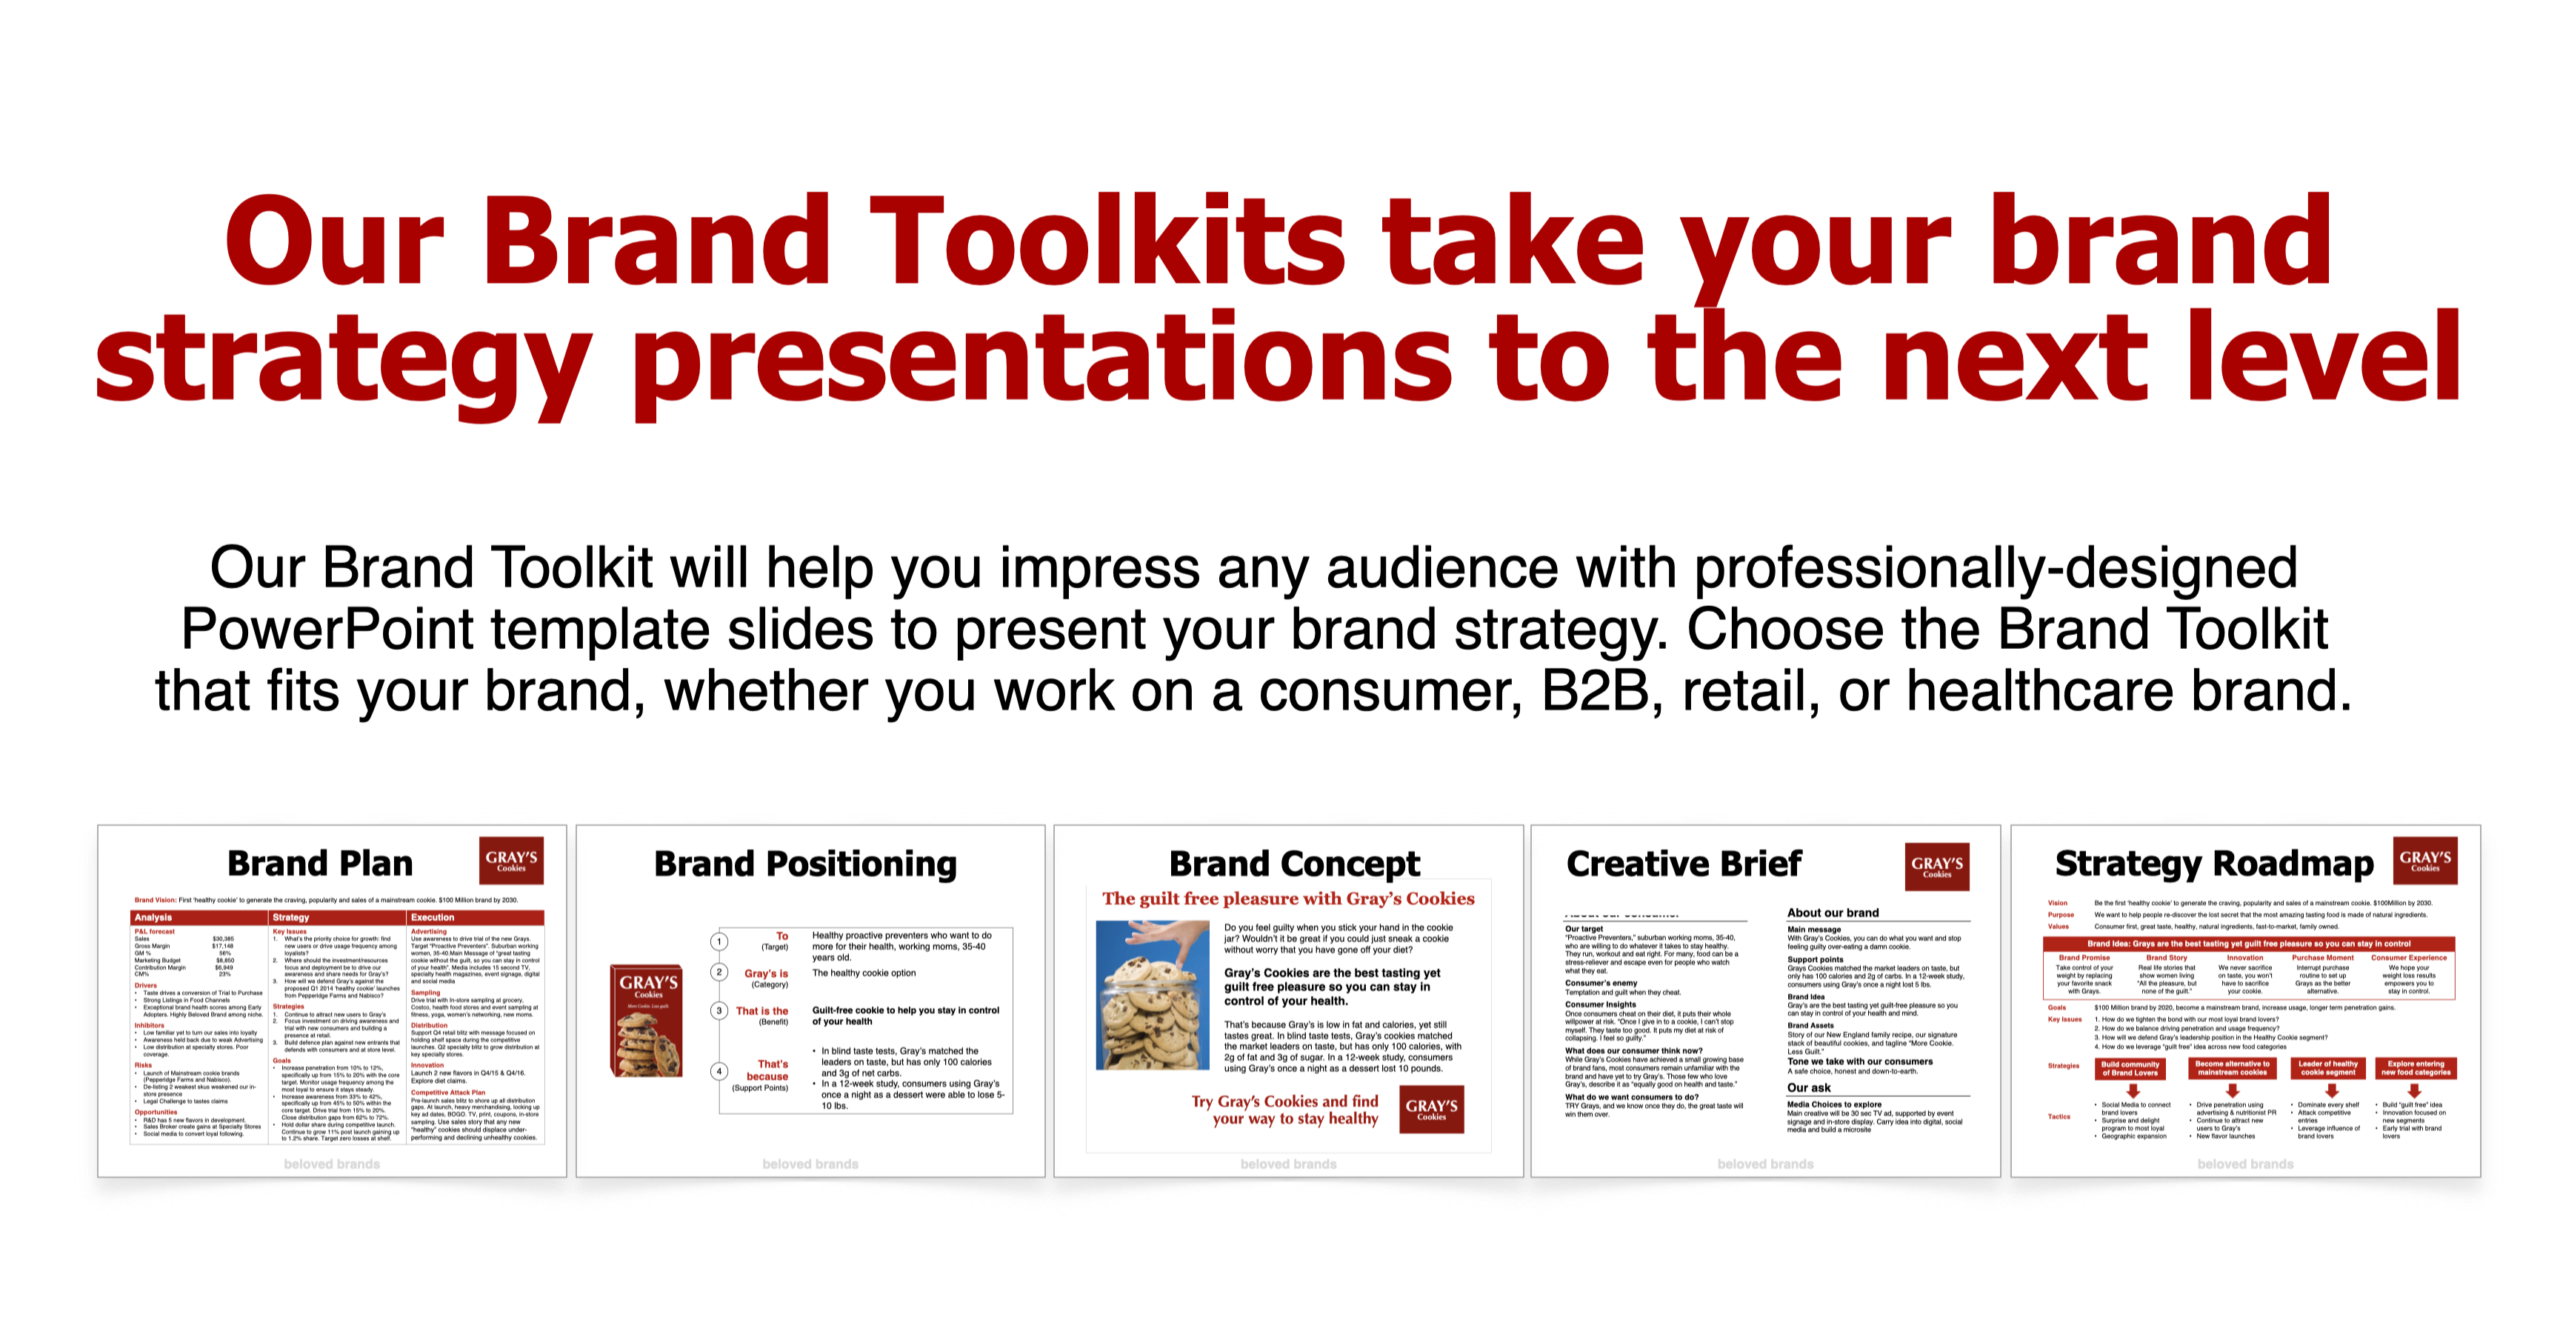 Brand Toolkits for consumer brands, B2B brands, healthcare brands, and retail brands.